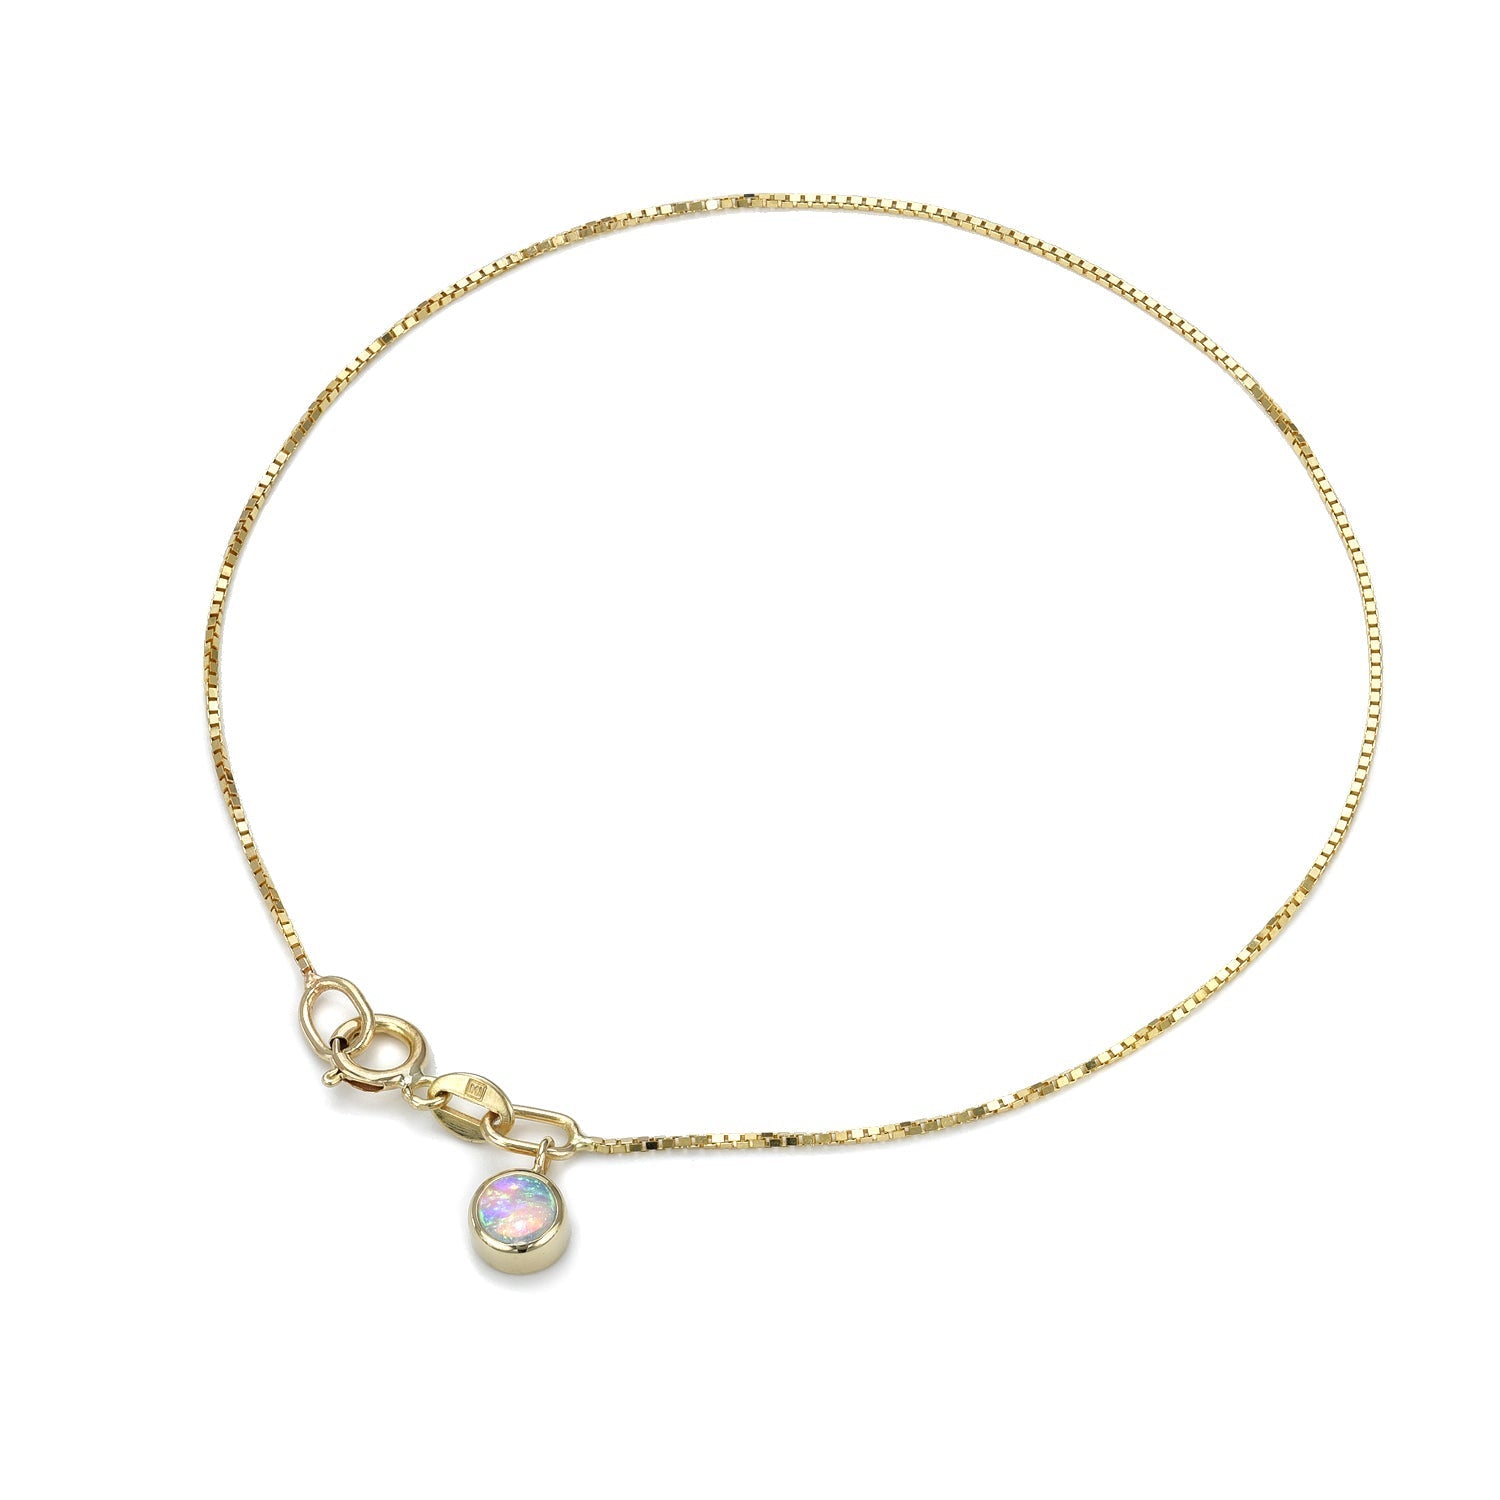 An Australian Opal Bracelet by NIXIN Jewelry against a white background. The dainty gold bracelet suspends a Crystal Opal charm.